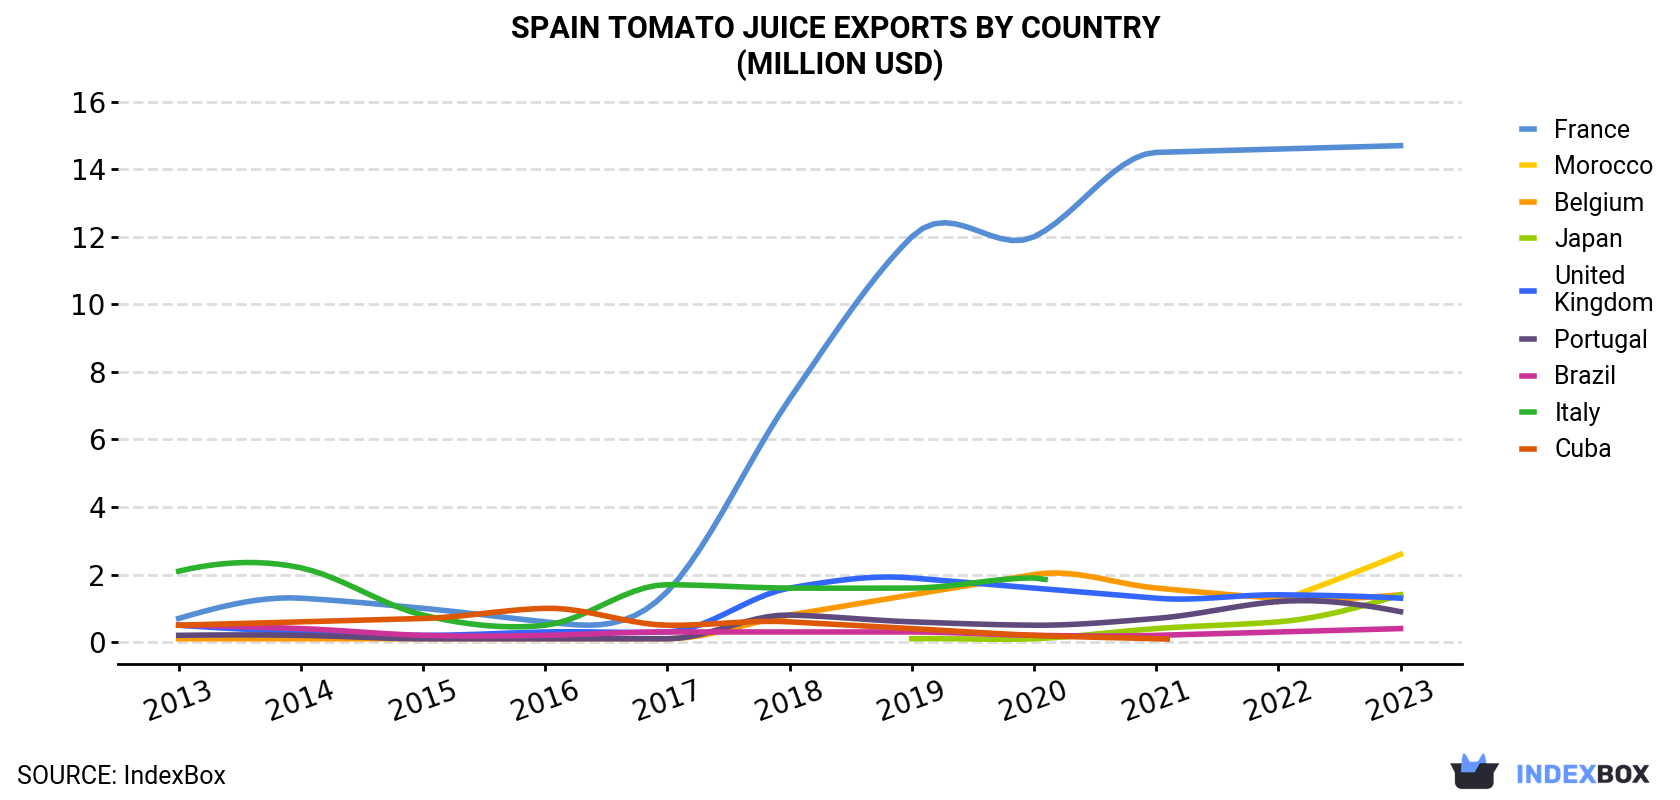 Spain Tomato Juice Exports By Country (Million USD)